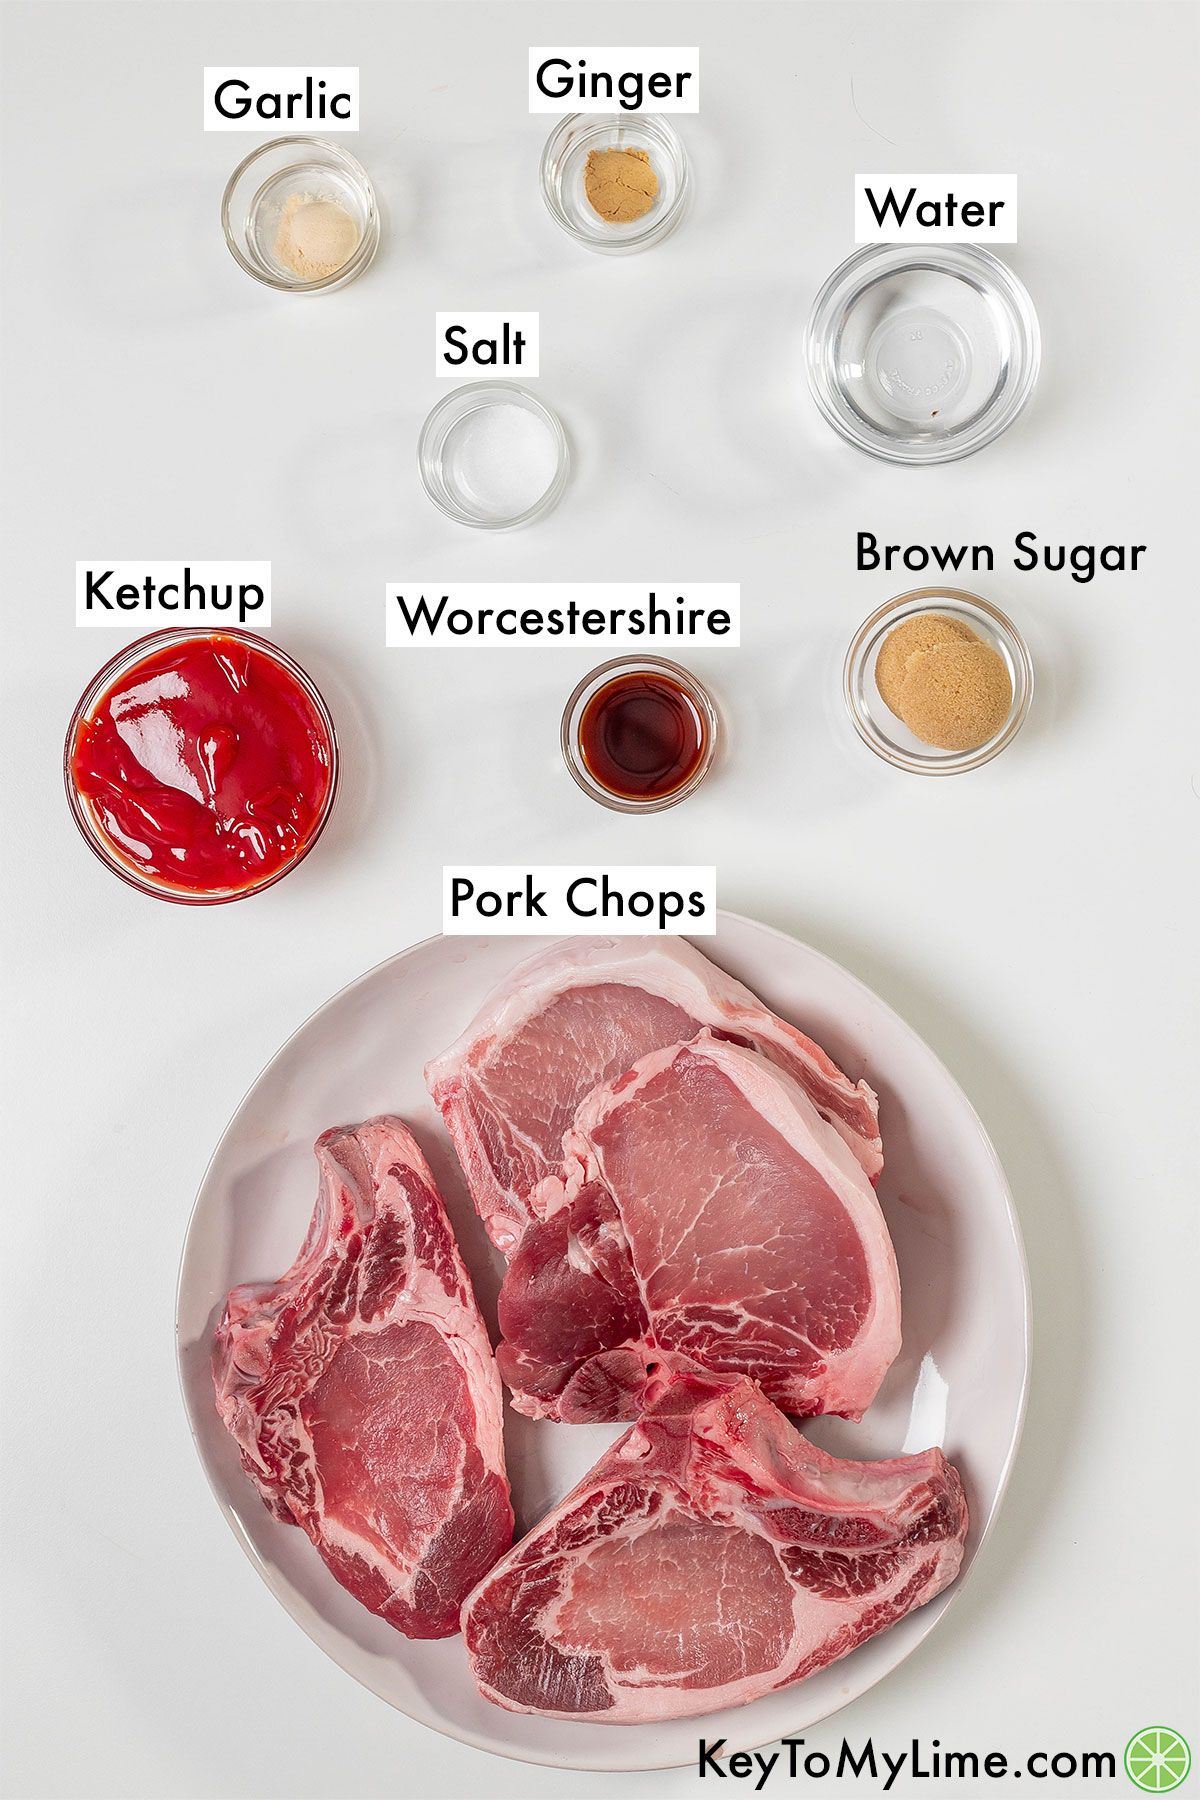 The labeled ingredients for broiled pork chops.